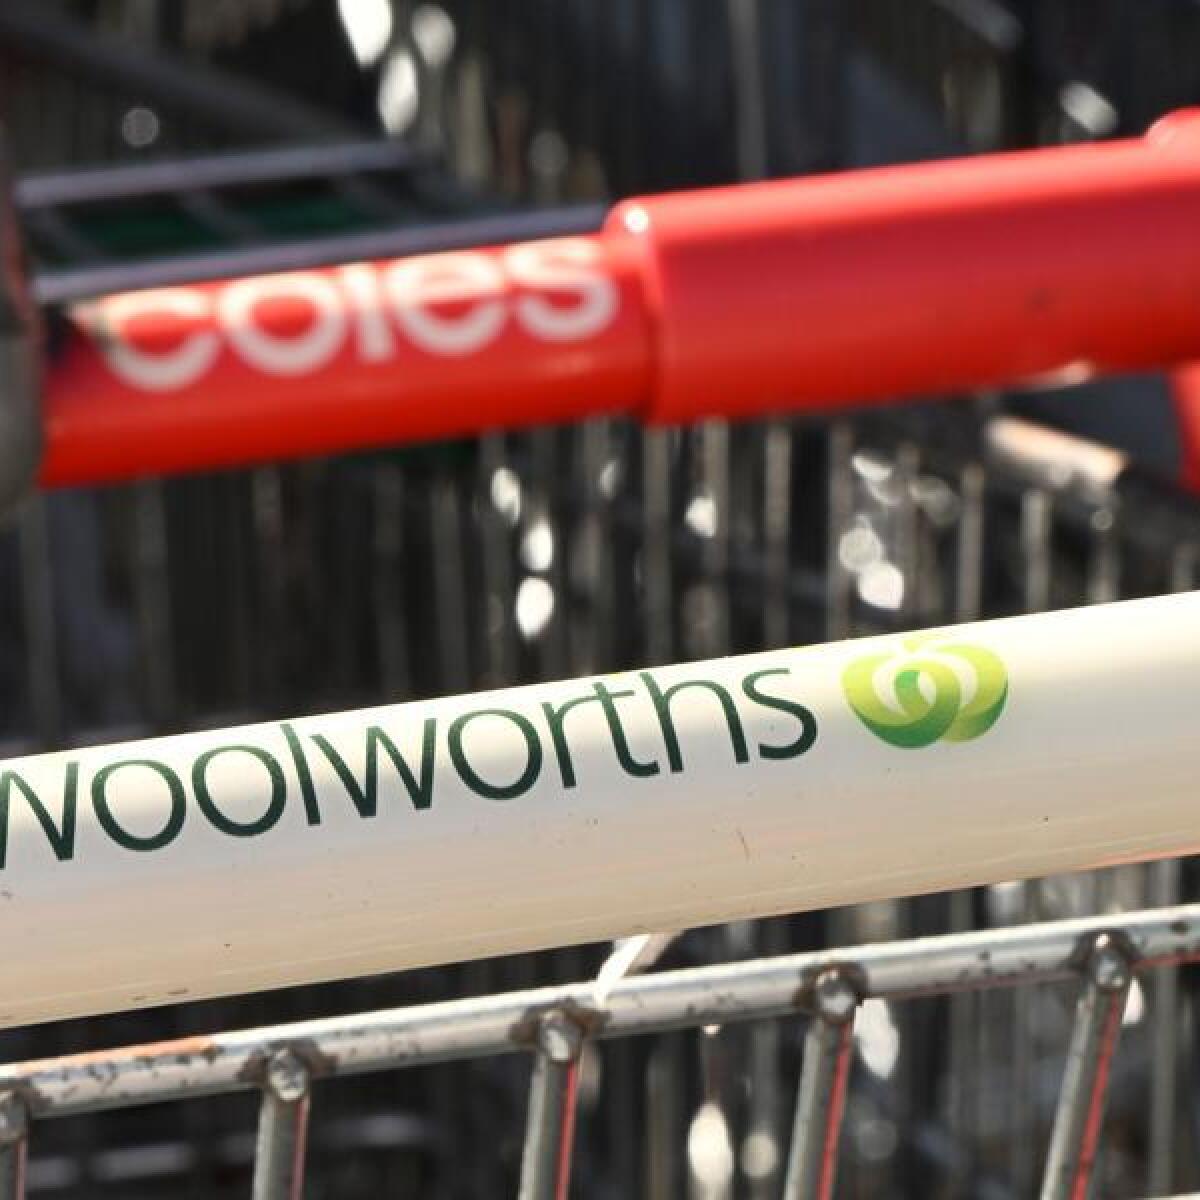 Coles and Woolworths' shopping trolleys.